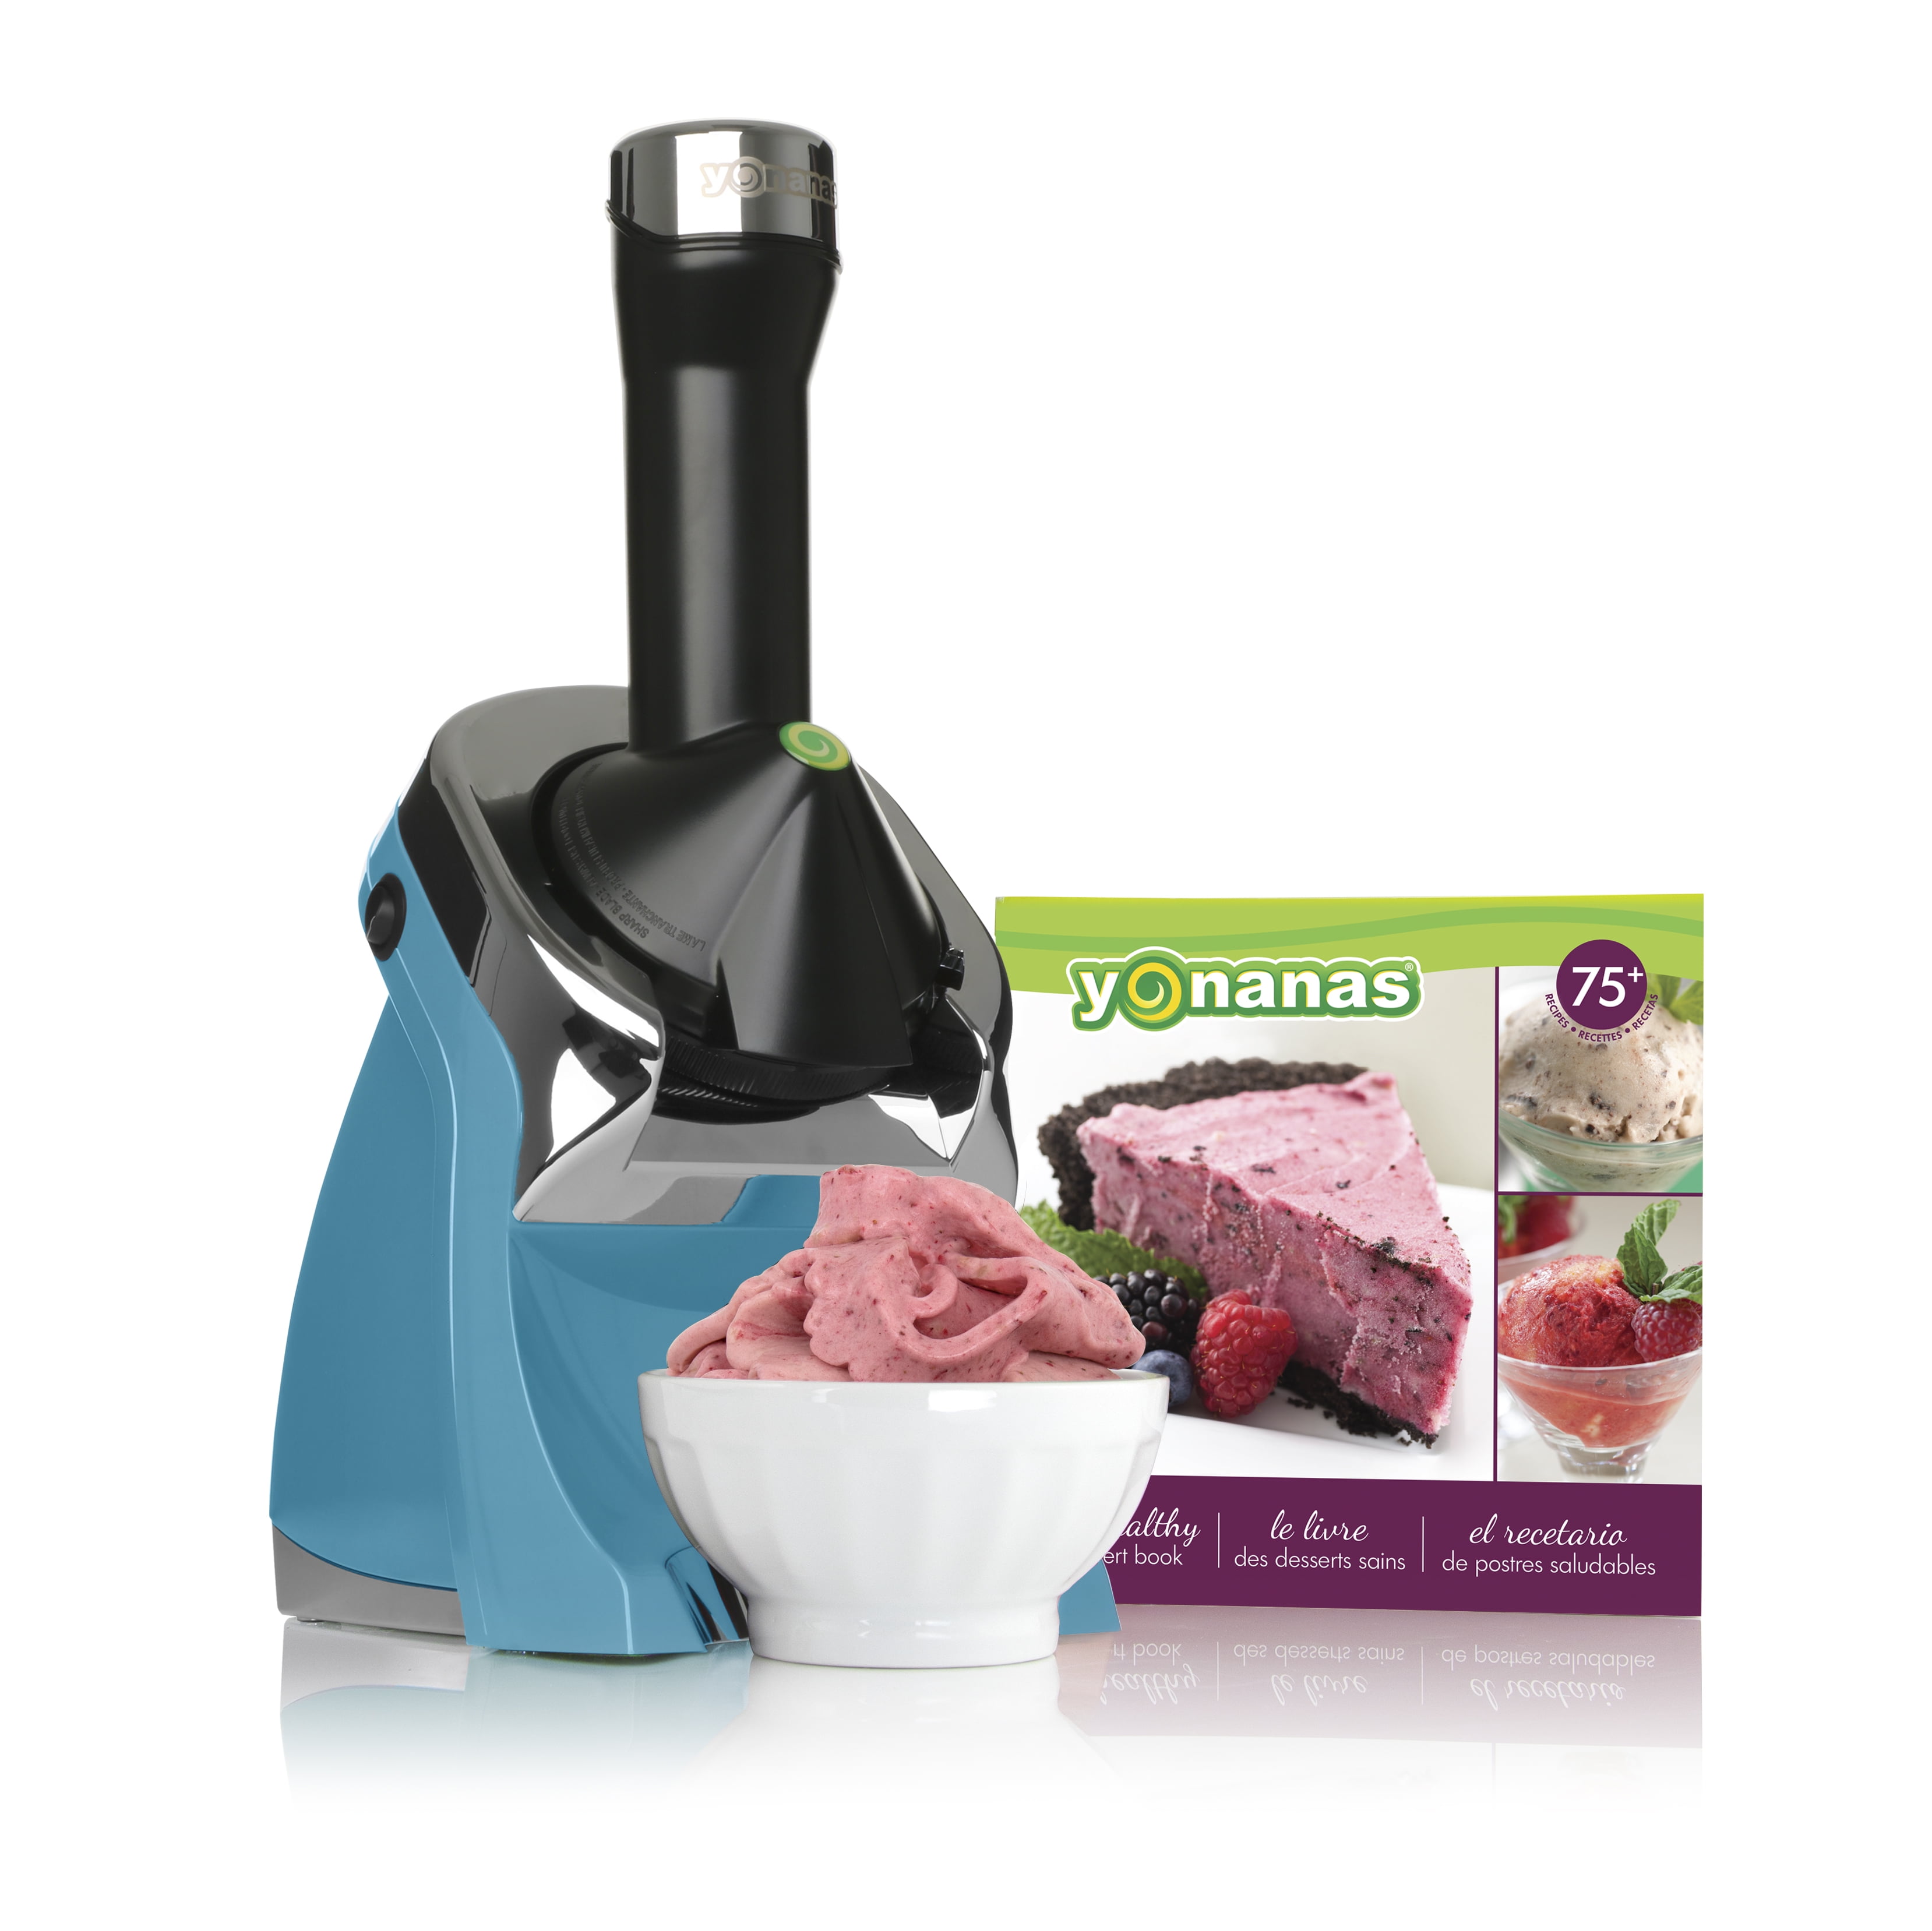 Yonanas Deluxe Healthy Soft-Serve Frozen Fruit Dessert Maker with Expanded  Recipe Book, in Teal 